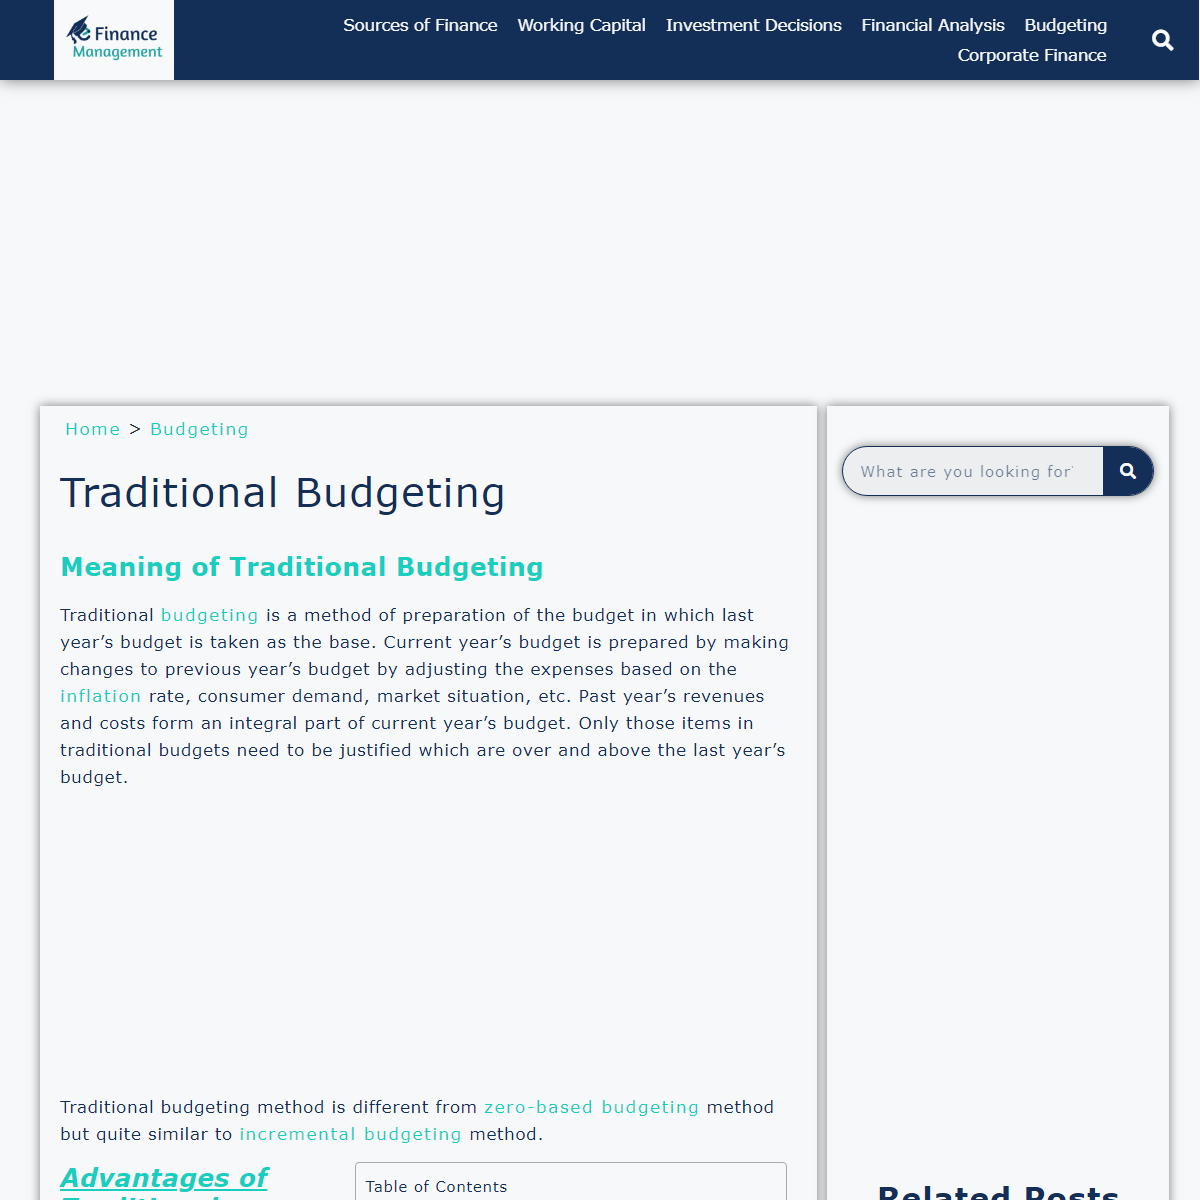 A complete backup of https://efinancemanagement.com/budgeting/traditional-budgeting